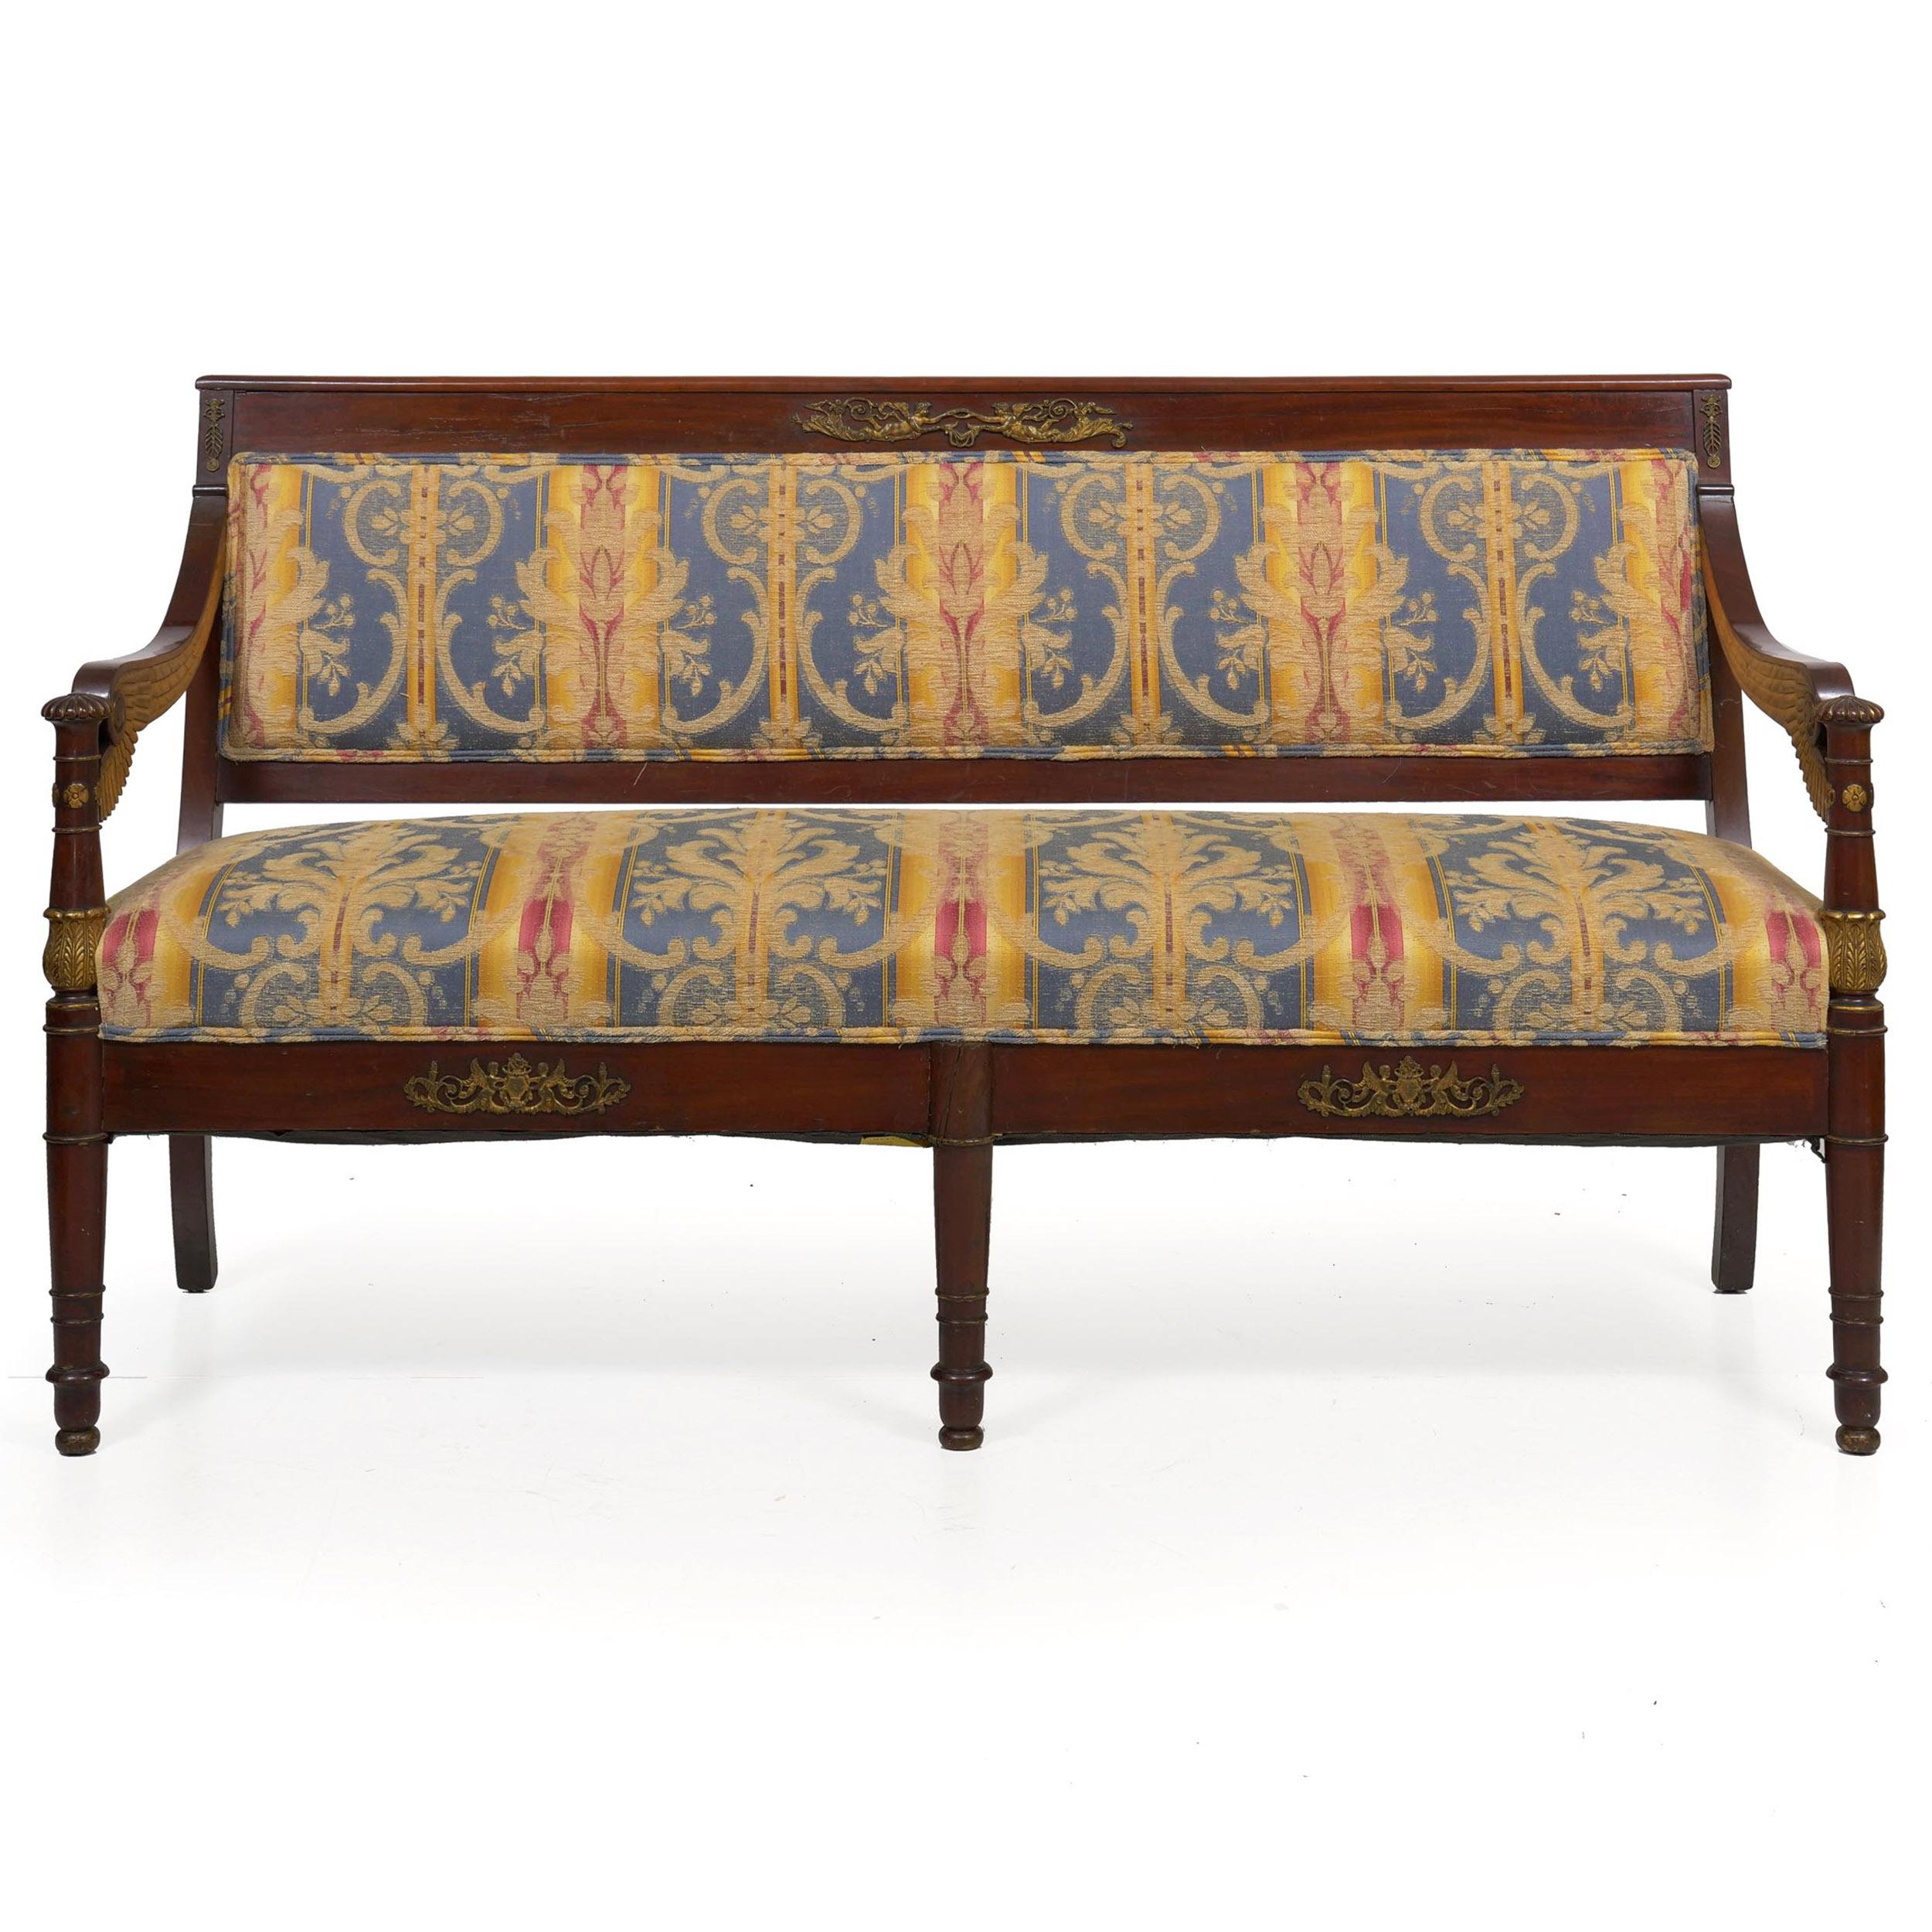 Empire style parcel-gilt and mahogany sofa
Continental, circa early 20th century, with carved wing supports
Item # 009RKR18 

A most attractive Empire style settee from the first quarter of the 20th century, it has restrained dimensions that